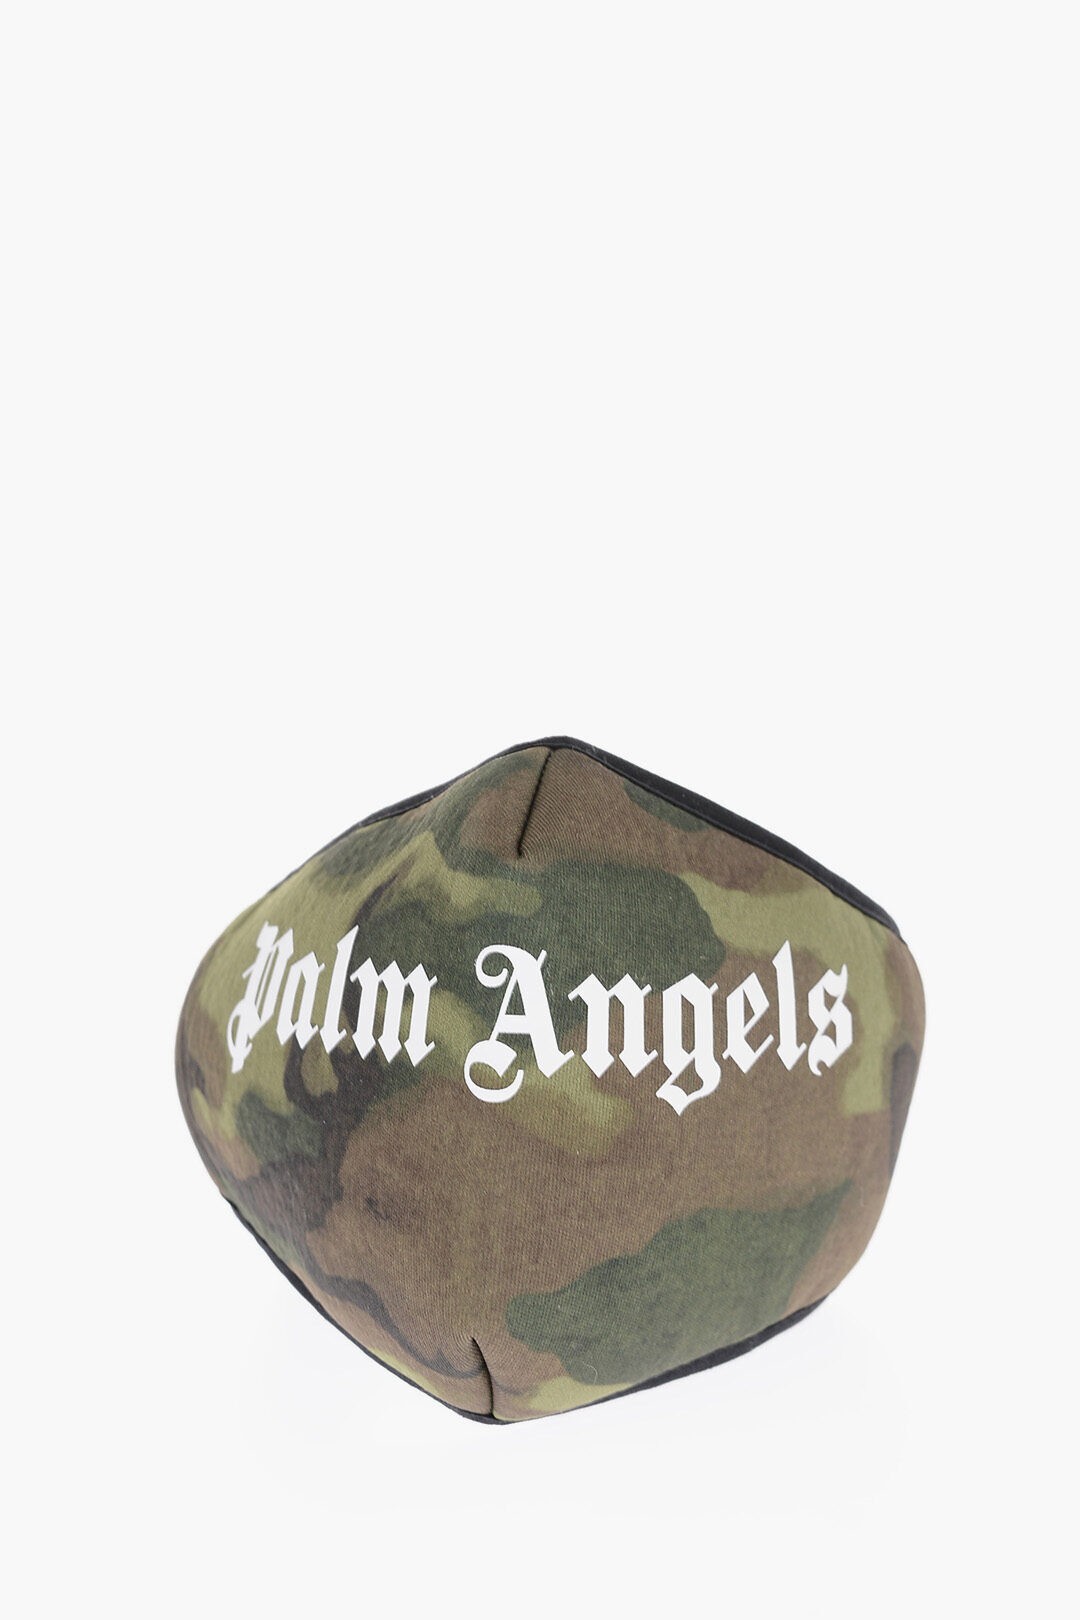 PALM ANGELS パーム エンジェルス 帽子 PMRG006R21 MAT001 5601 メンズ CAMOFLAGE MOTIF FACE MASK WITH TOUCH-STRAP CLOSURE 【関税・送料無料】【ラッピング無料】 dk